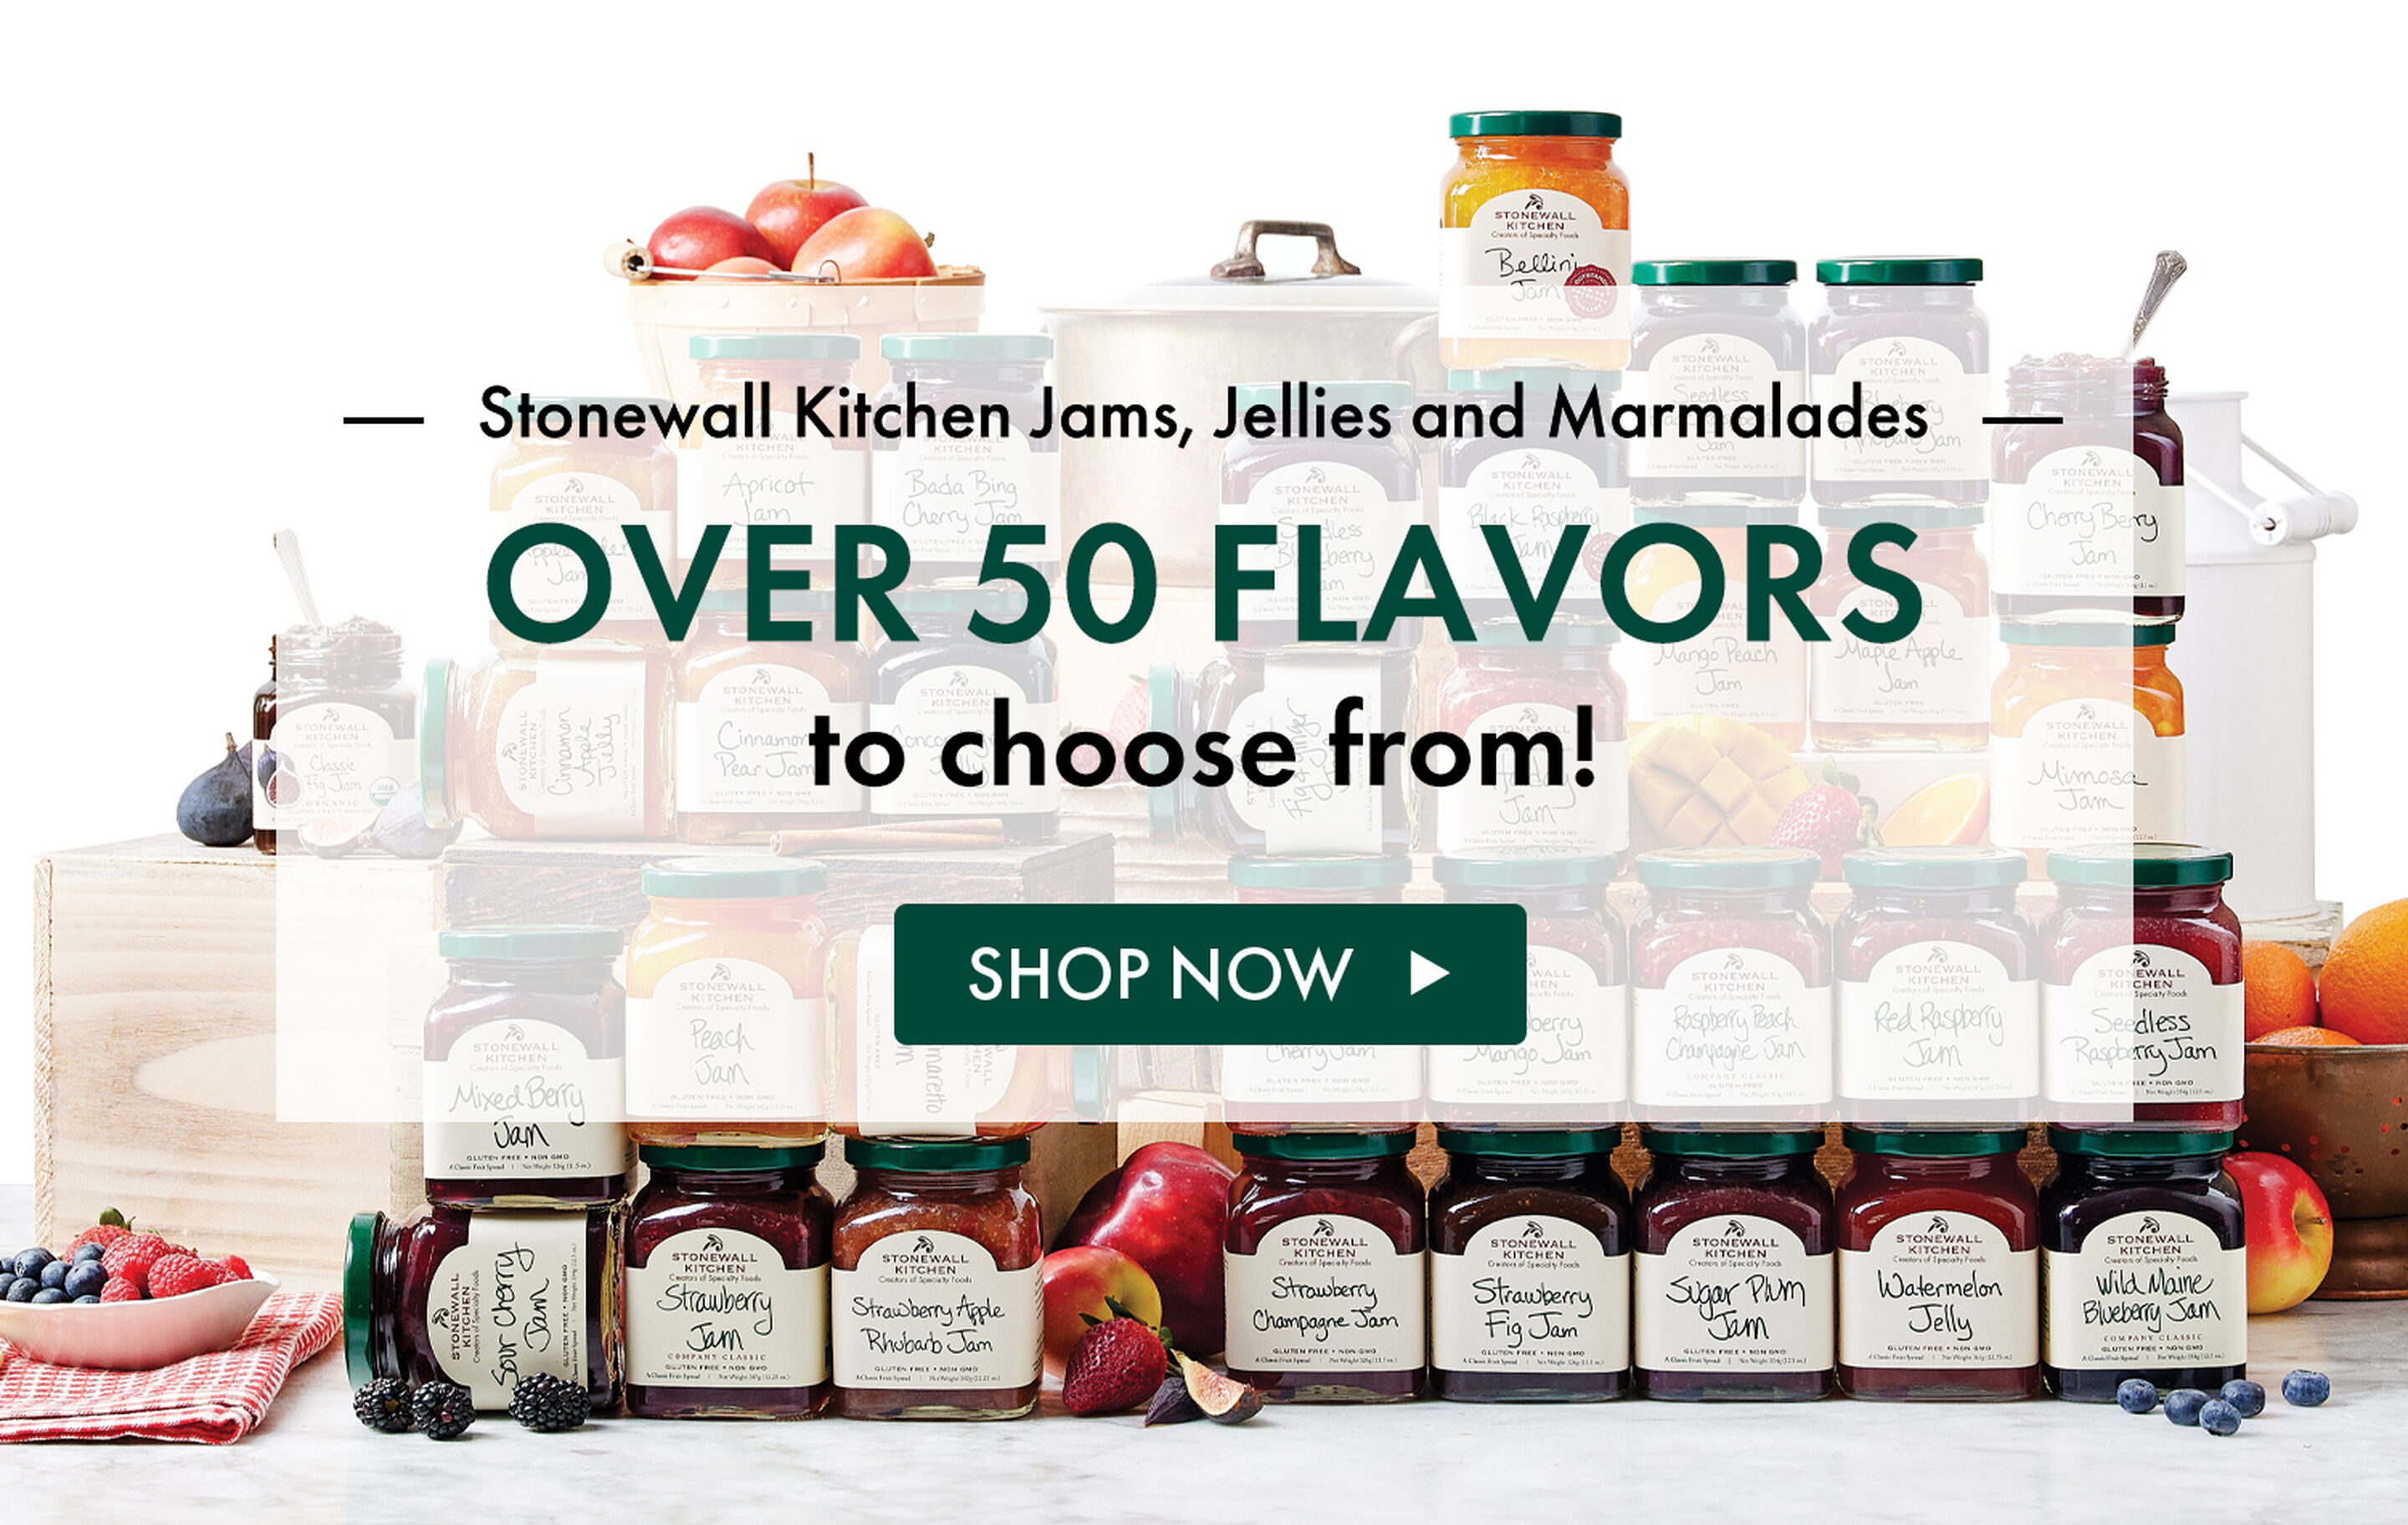 Stonewall Kitchen Jams, Jellies and Marmalades - Over 50 FLAVORS to choose from! - Shop Now